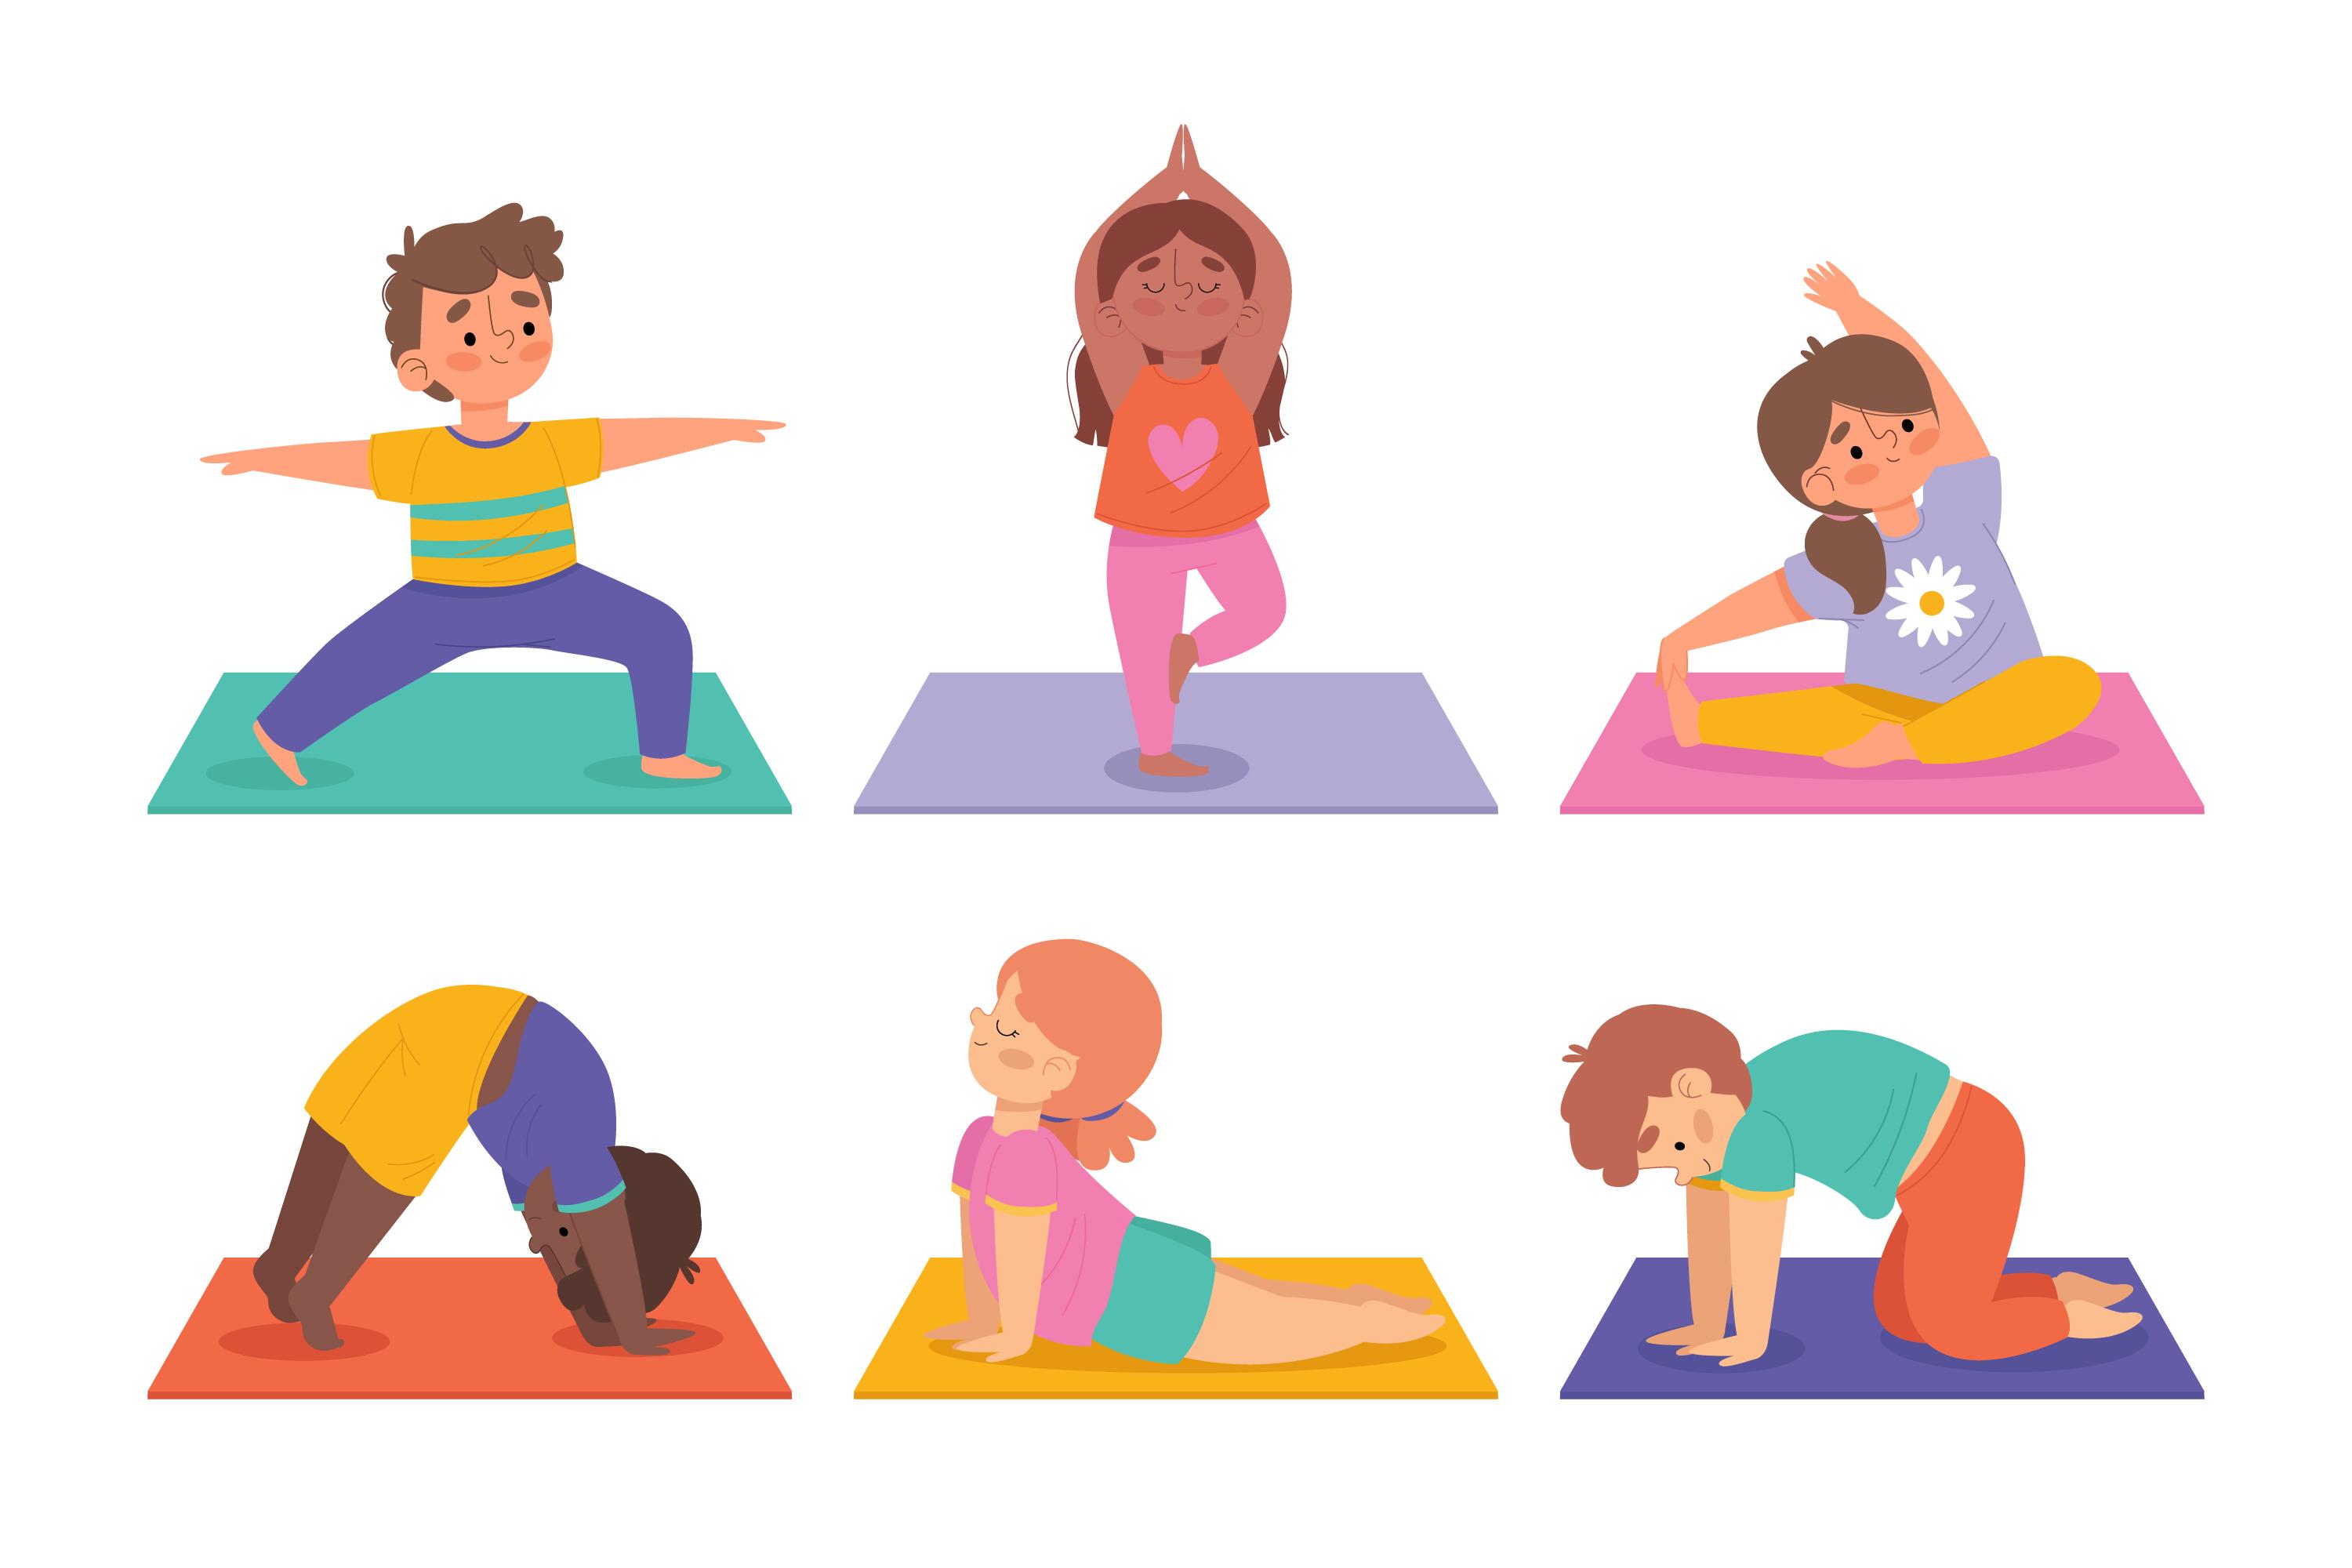 animated drawing of 6 kids doing a variety of yoga poses